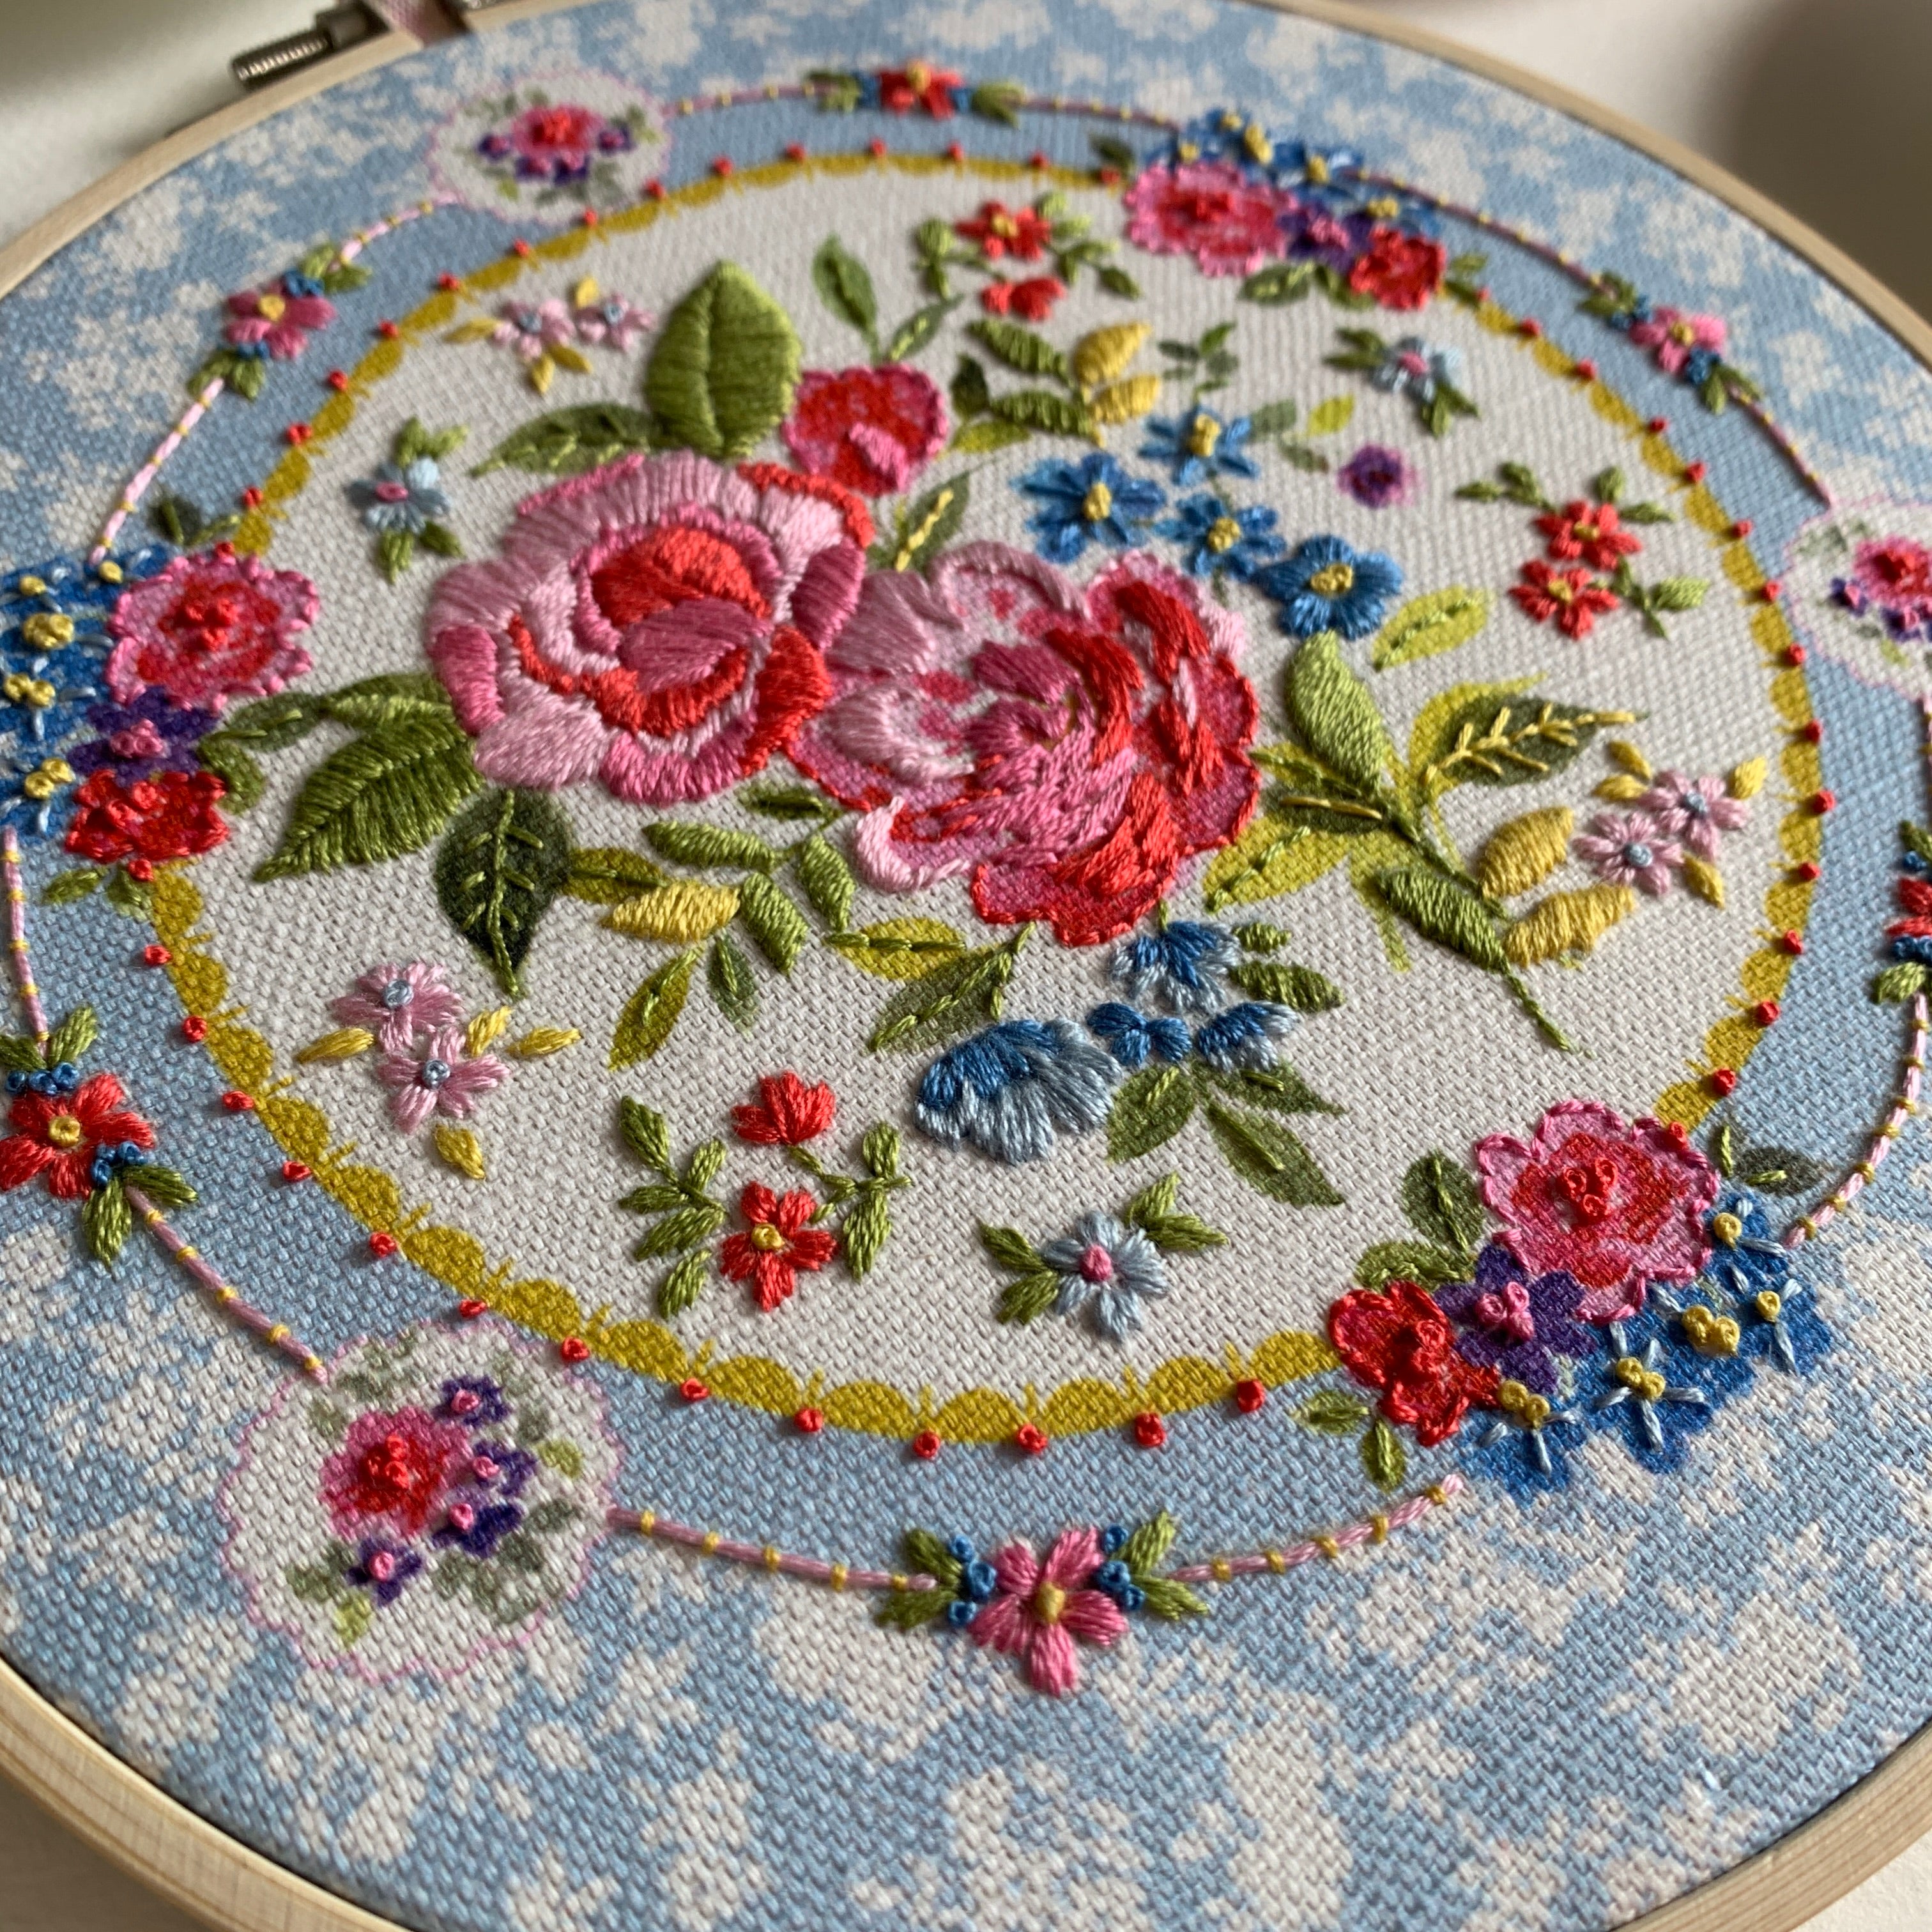 Porcelain Embroidery kit.